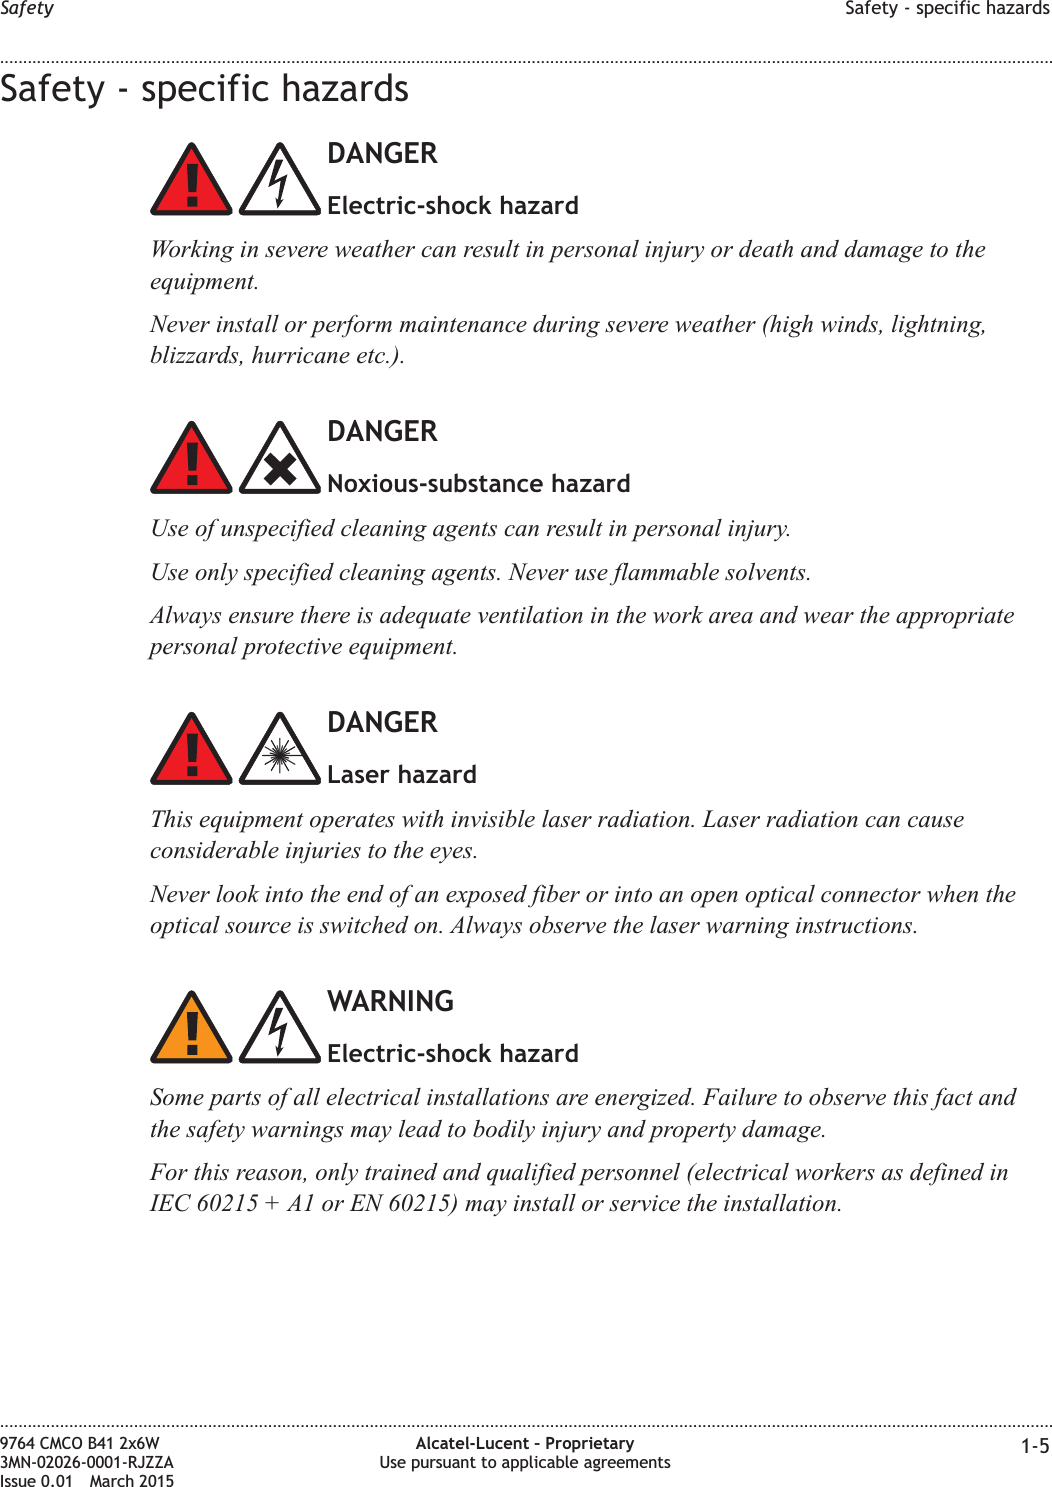 Safety - specific hazardsDANGERElectric-shock hazardWorking in severe weather can result in personal injury or death and damage to theequipment.Never install or perform maintenance during severe weather (high winds, lightning,blizzards, hurricane etc.).DANGERNoxious-substance hazardUse of unspecified cleaning agents can result in personal injury.Use only specified cleaning agents. Never use flammable solvents.Always ensure there is adequate ventilation in the work area and wear the appropriatepersonal protective equipment.DANGERLaser hazardThis equipment operates with invisible laser radiation. Laser radiation can causeconsiderable injuries to the eyes.Never look into the end of an exposed fiber or into an open optical connector when theoptical source is switched on. Always observe the laser warning instructions.WARNINGElectric-shock hazardSome parts of all electrical installations are energized. Failure to observe this fact andthe safety warnings may lead to bodily injury and property damage.For this reason, only trained and qualified personnel (electrical workers as defined inIEC 60215 + A1 or EN 60215) may install or service the installation.Safety Safety - specific hazards........................................................................................................................................................................................................................................................................................................................................................................................................................................................................9764 CMCO B41 2x6W3MN-02026-0001-RJZZAIssue 0.01 March 2015Alcatel-Lucent – ProprietaryUse pursuant to applicable agreements 1-5DRAFTDRAFT